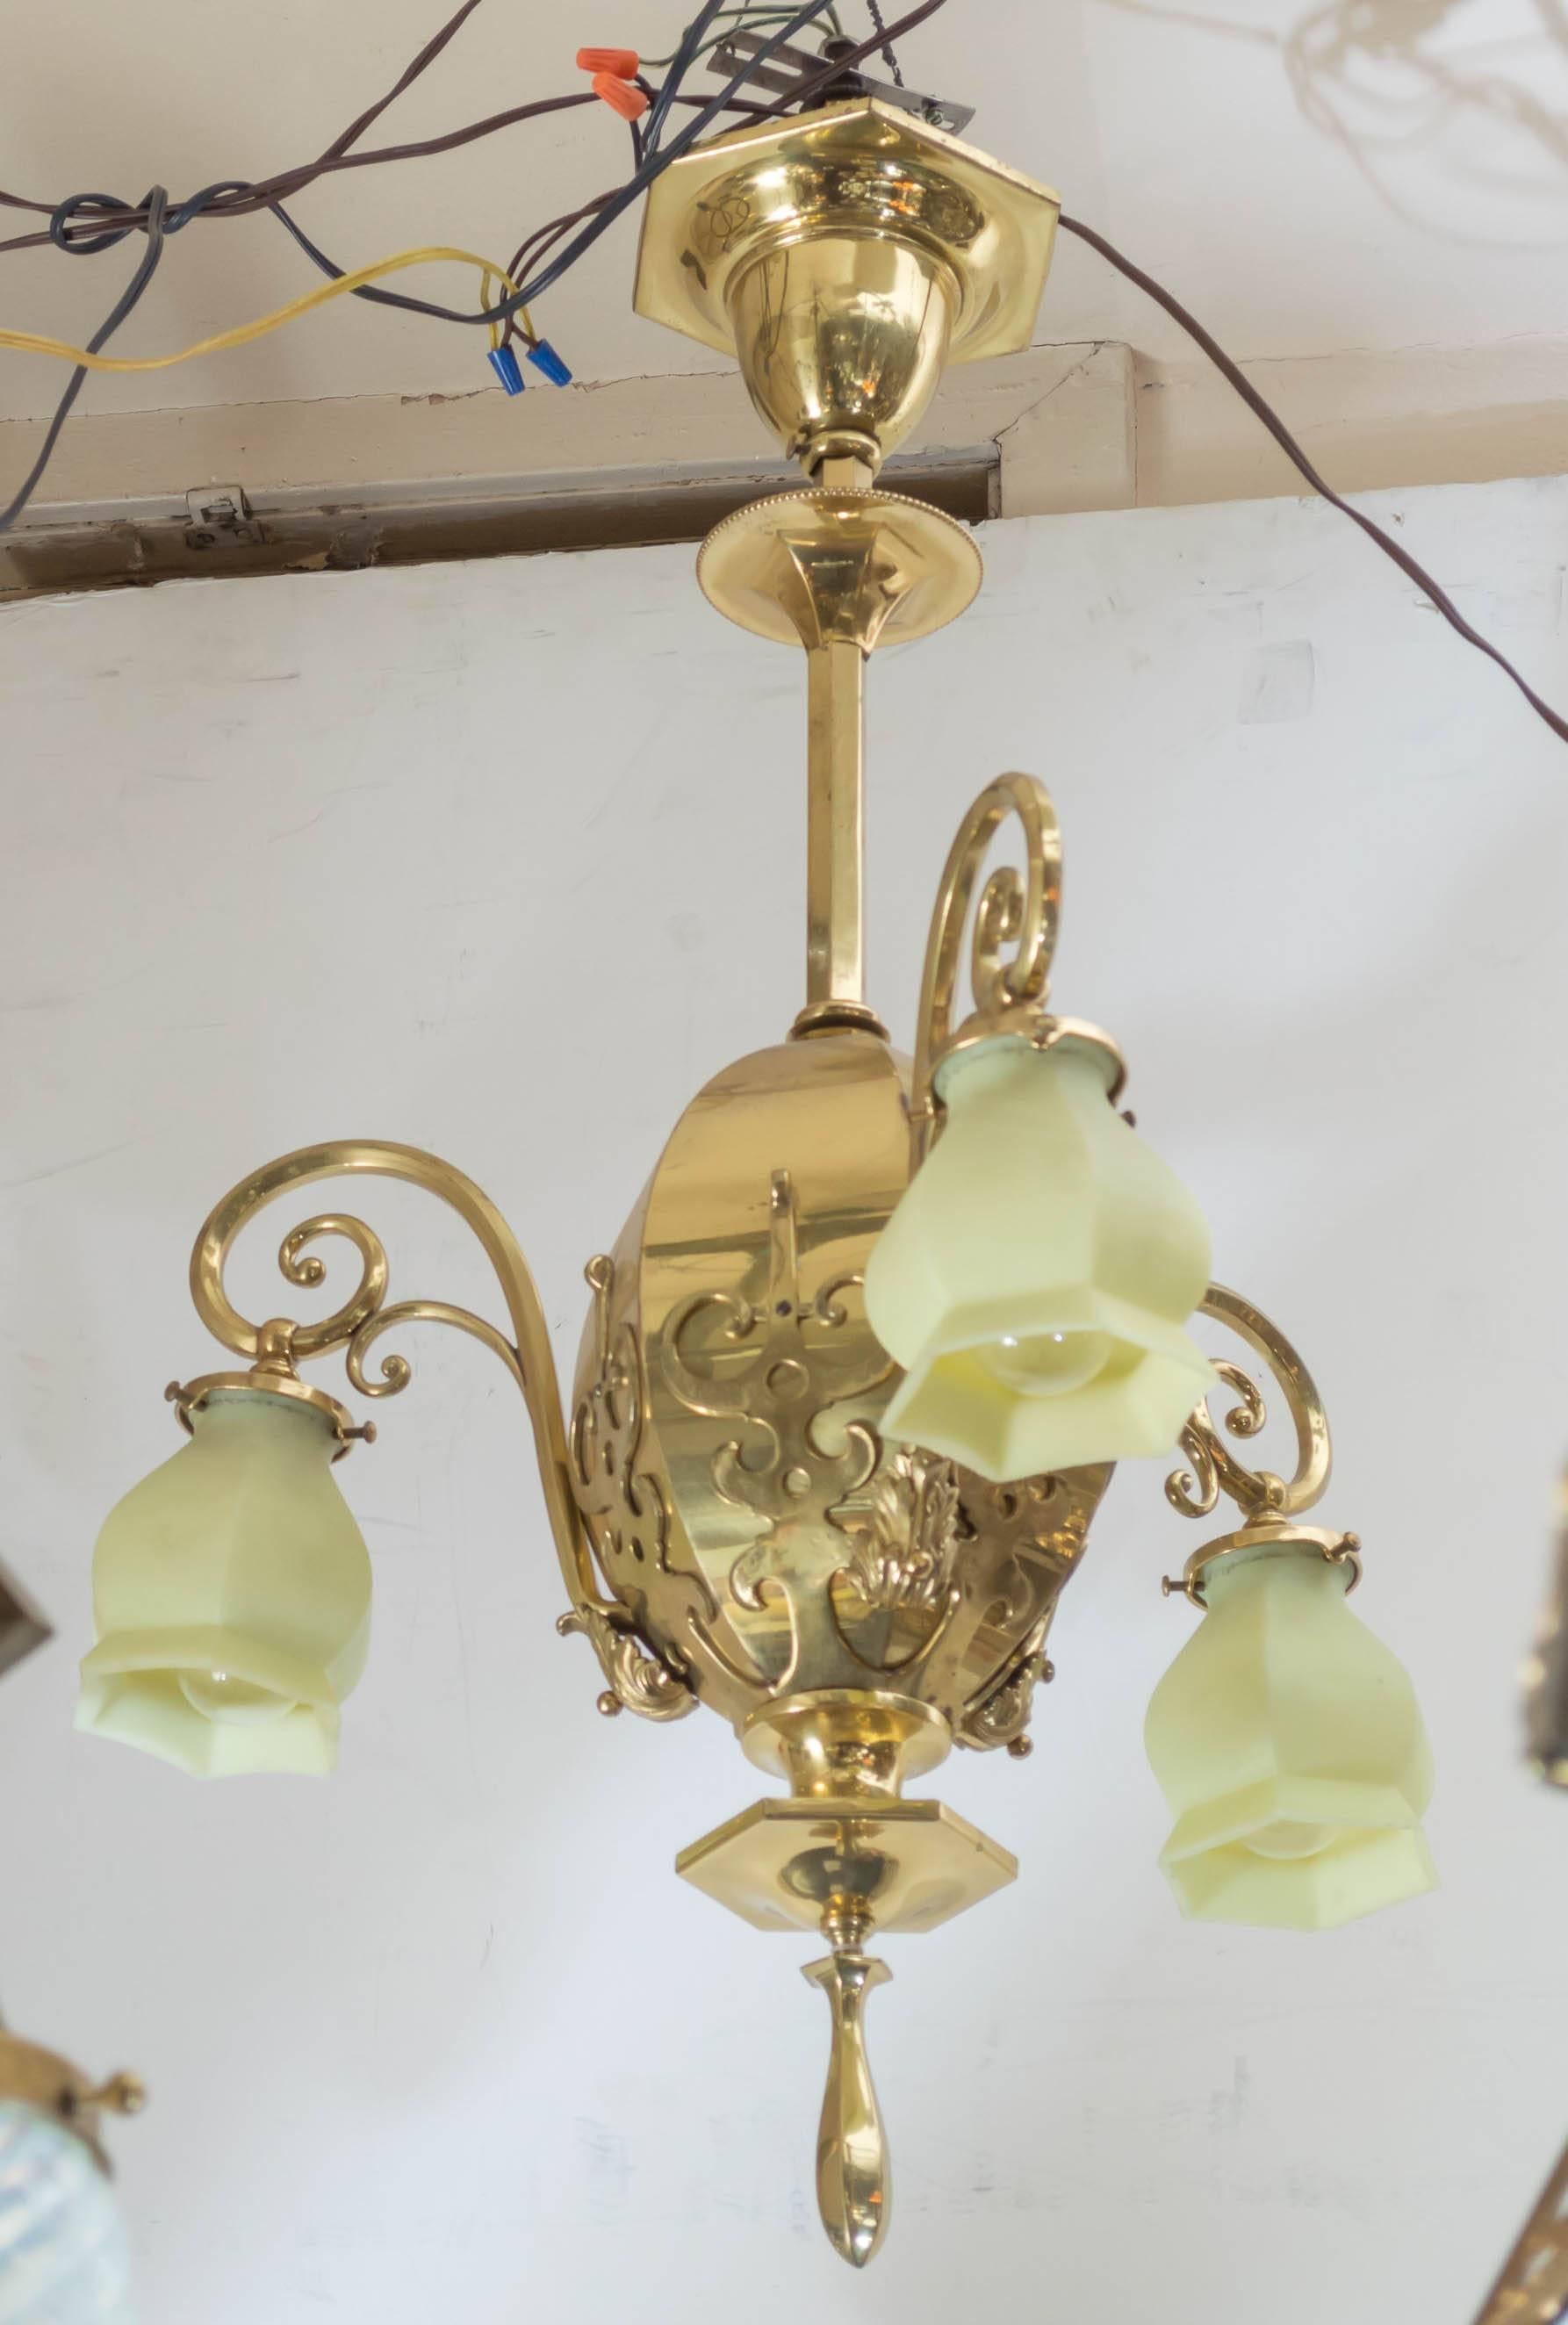 Hand-Crafted Late Victorian Three-Arm Chandelier with Original Vaseline Glass Shades